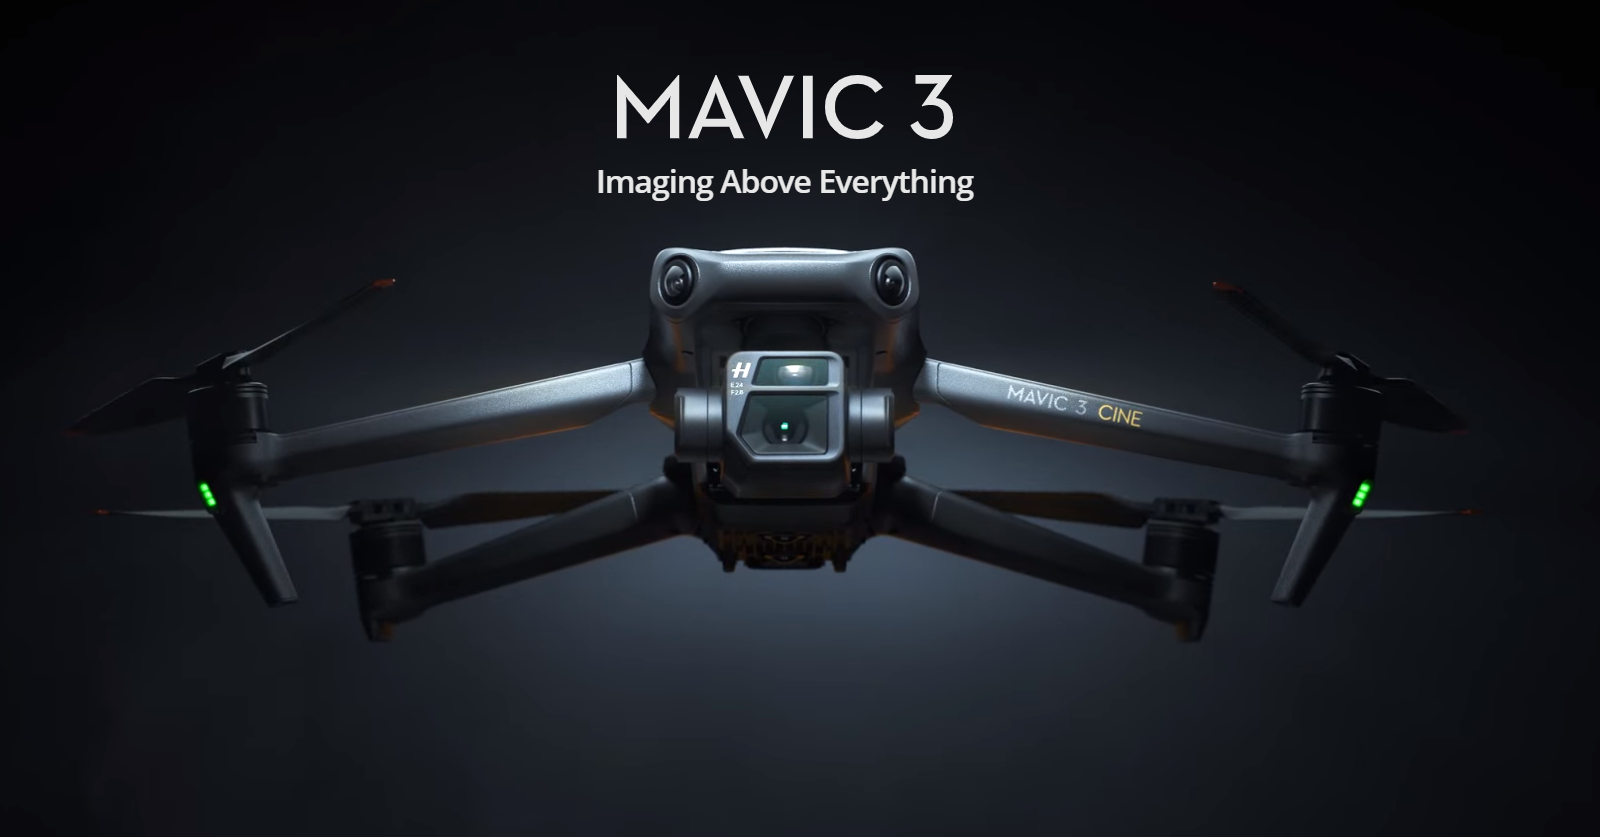 DJI-Mavic-3--Cine-15KM-1080P60fps-FPV-with-43-CMOS-Hasselblad-Camera-Omnidirectional-Obstacle-46mins-1911730-1